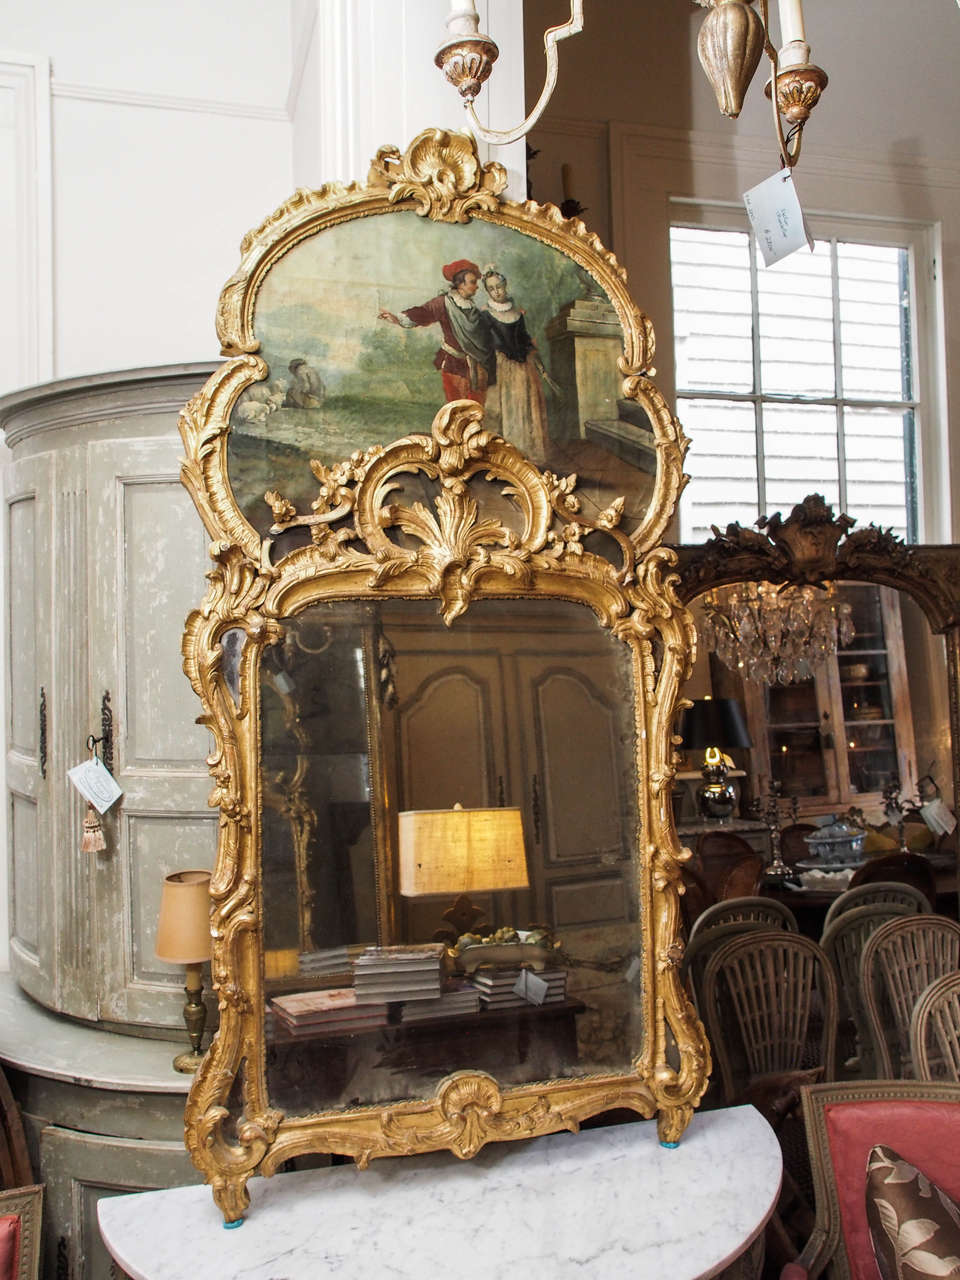 Early 19th century French Louis XV style carved giltwood trumeau. The painting is oil on canvas depicting a romantic country scene, a young couple with a shepherd and his lambs in the background.